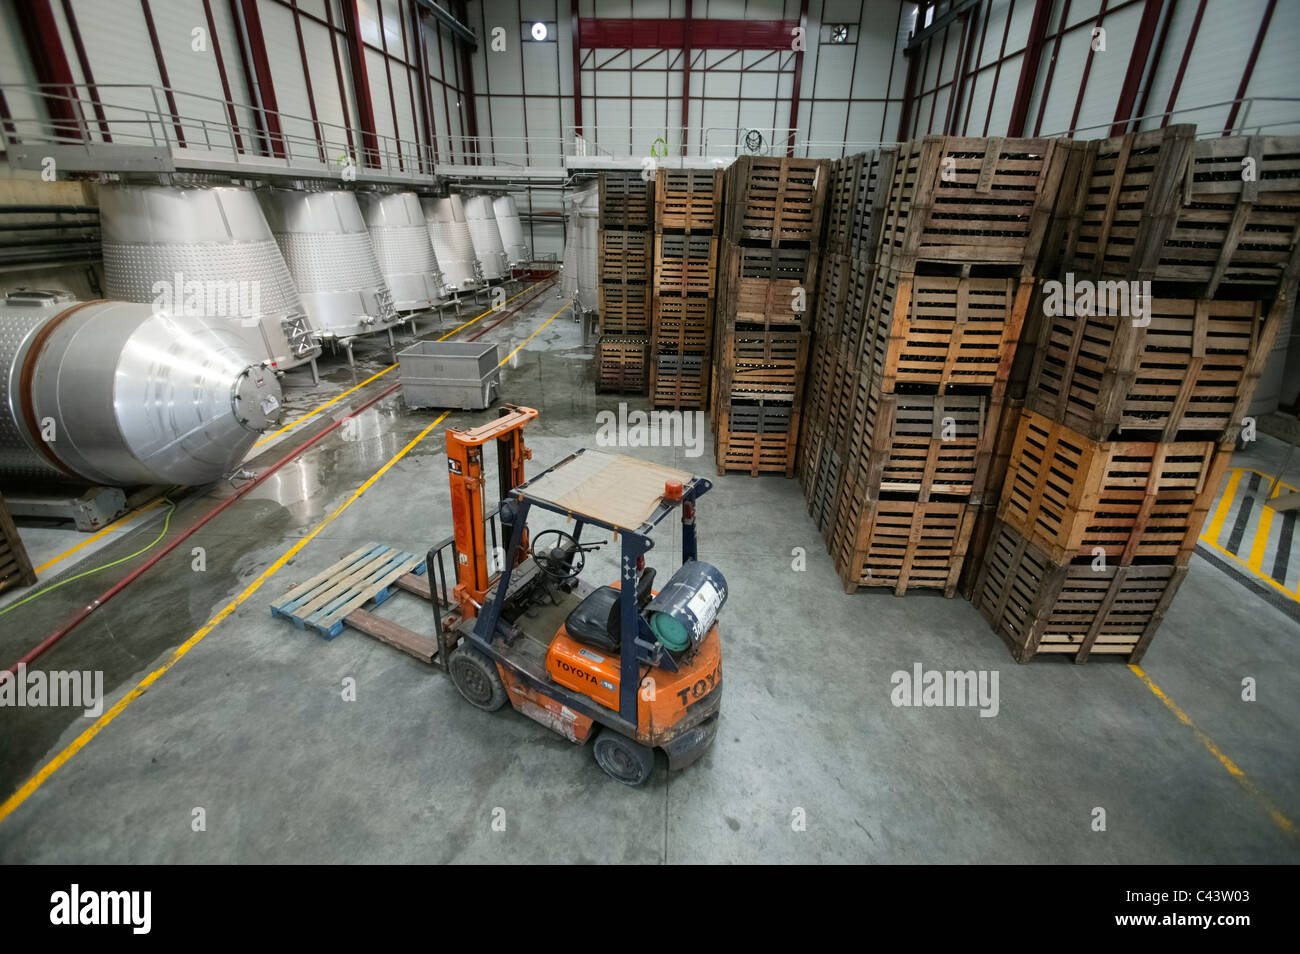 Forklift truck in warehouse Stock Photo